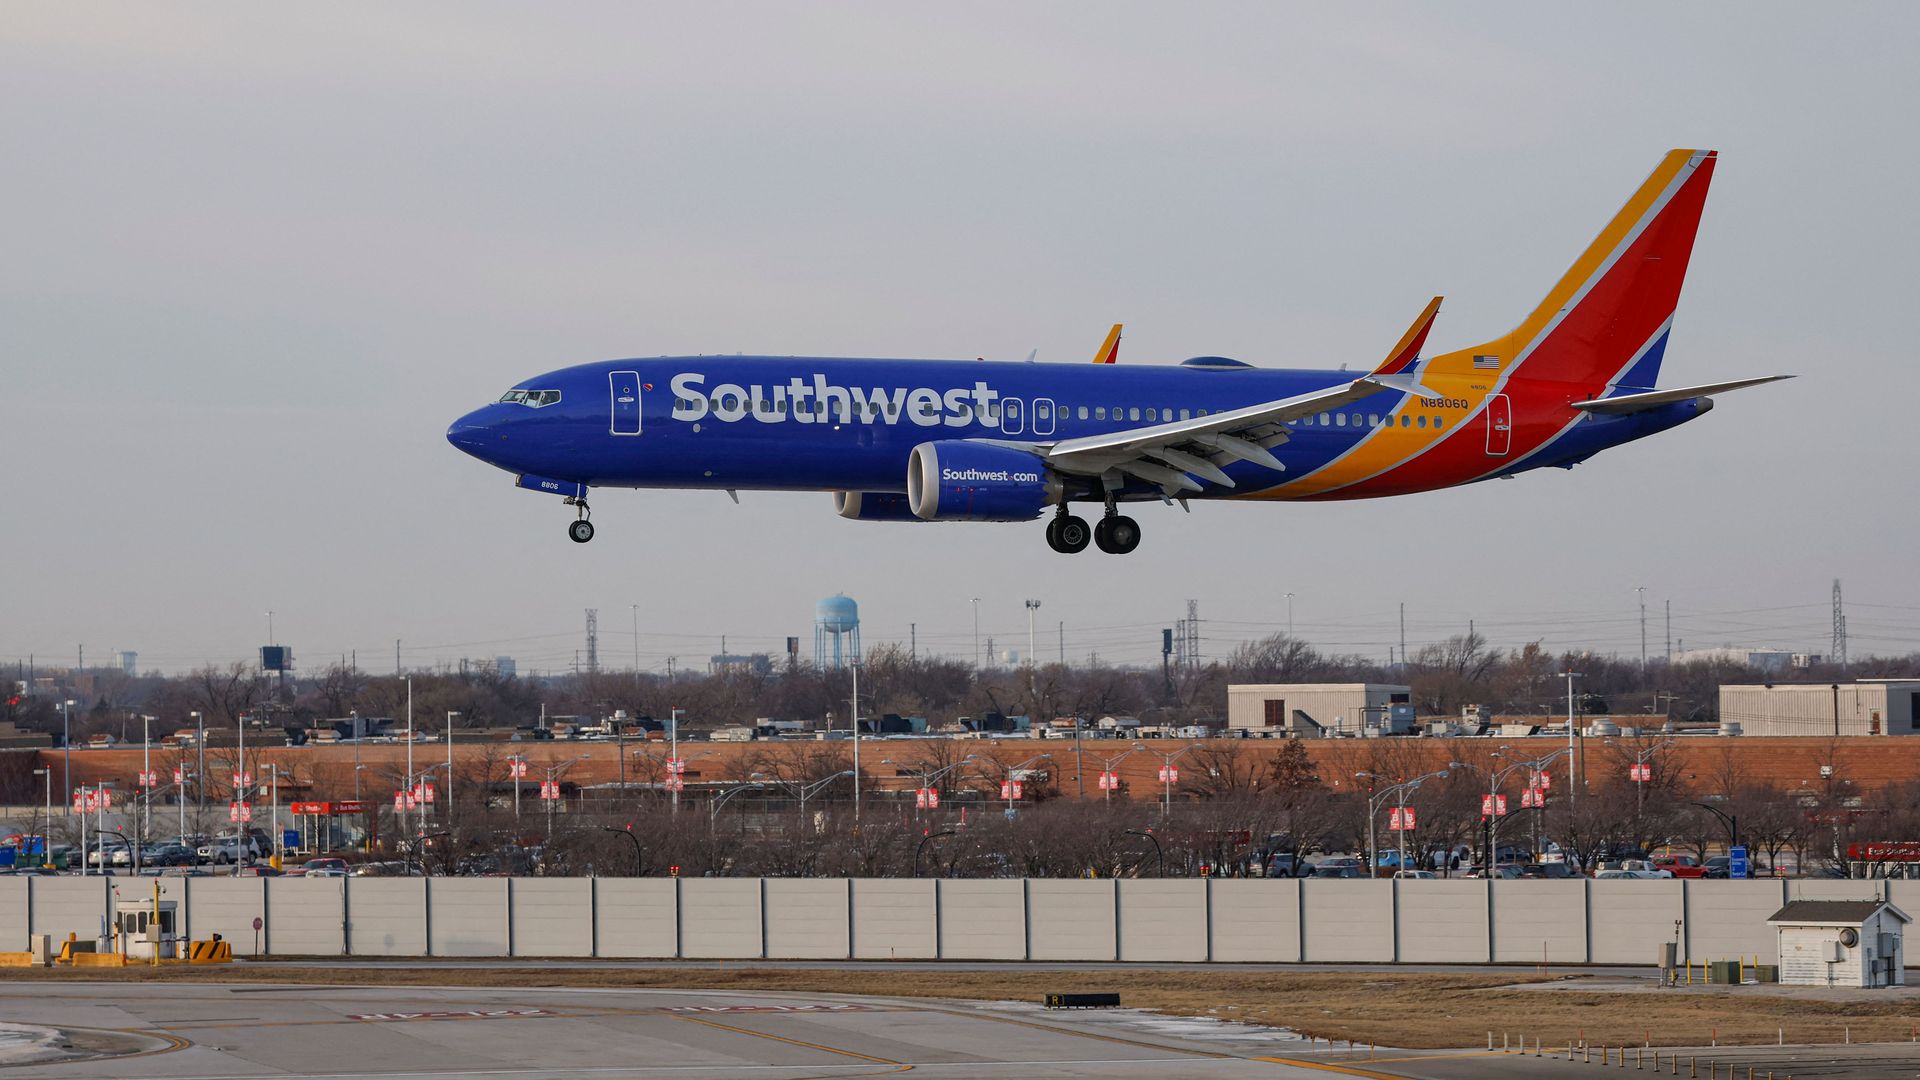 Photo of a Southwest Airlines aircraft landing at an airport